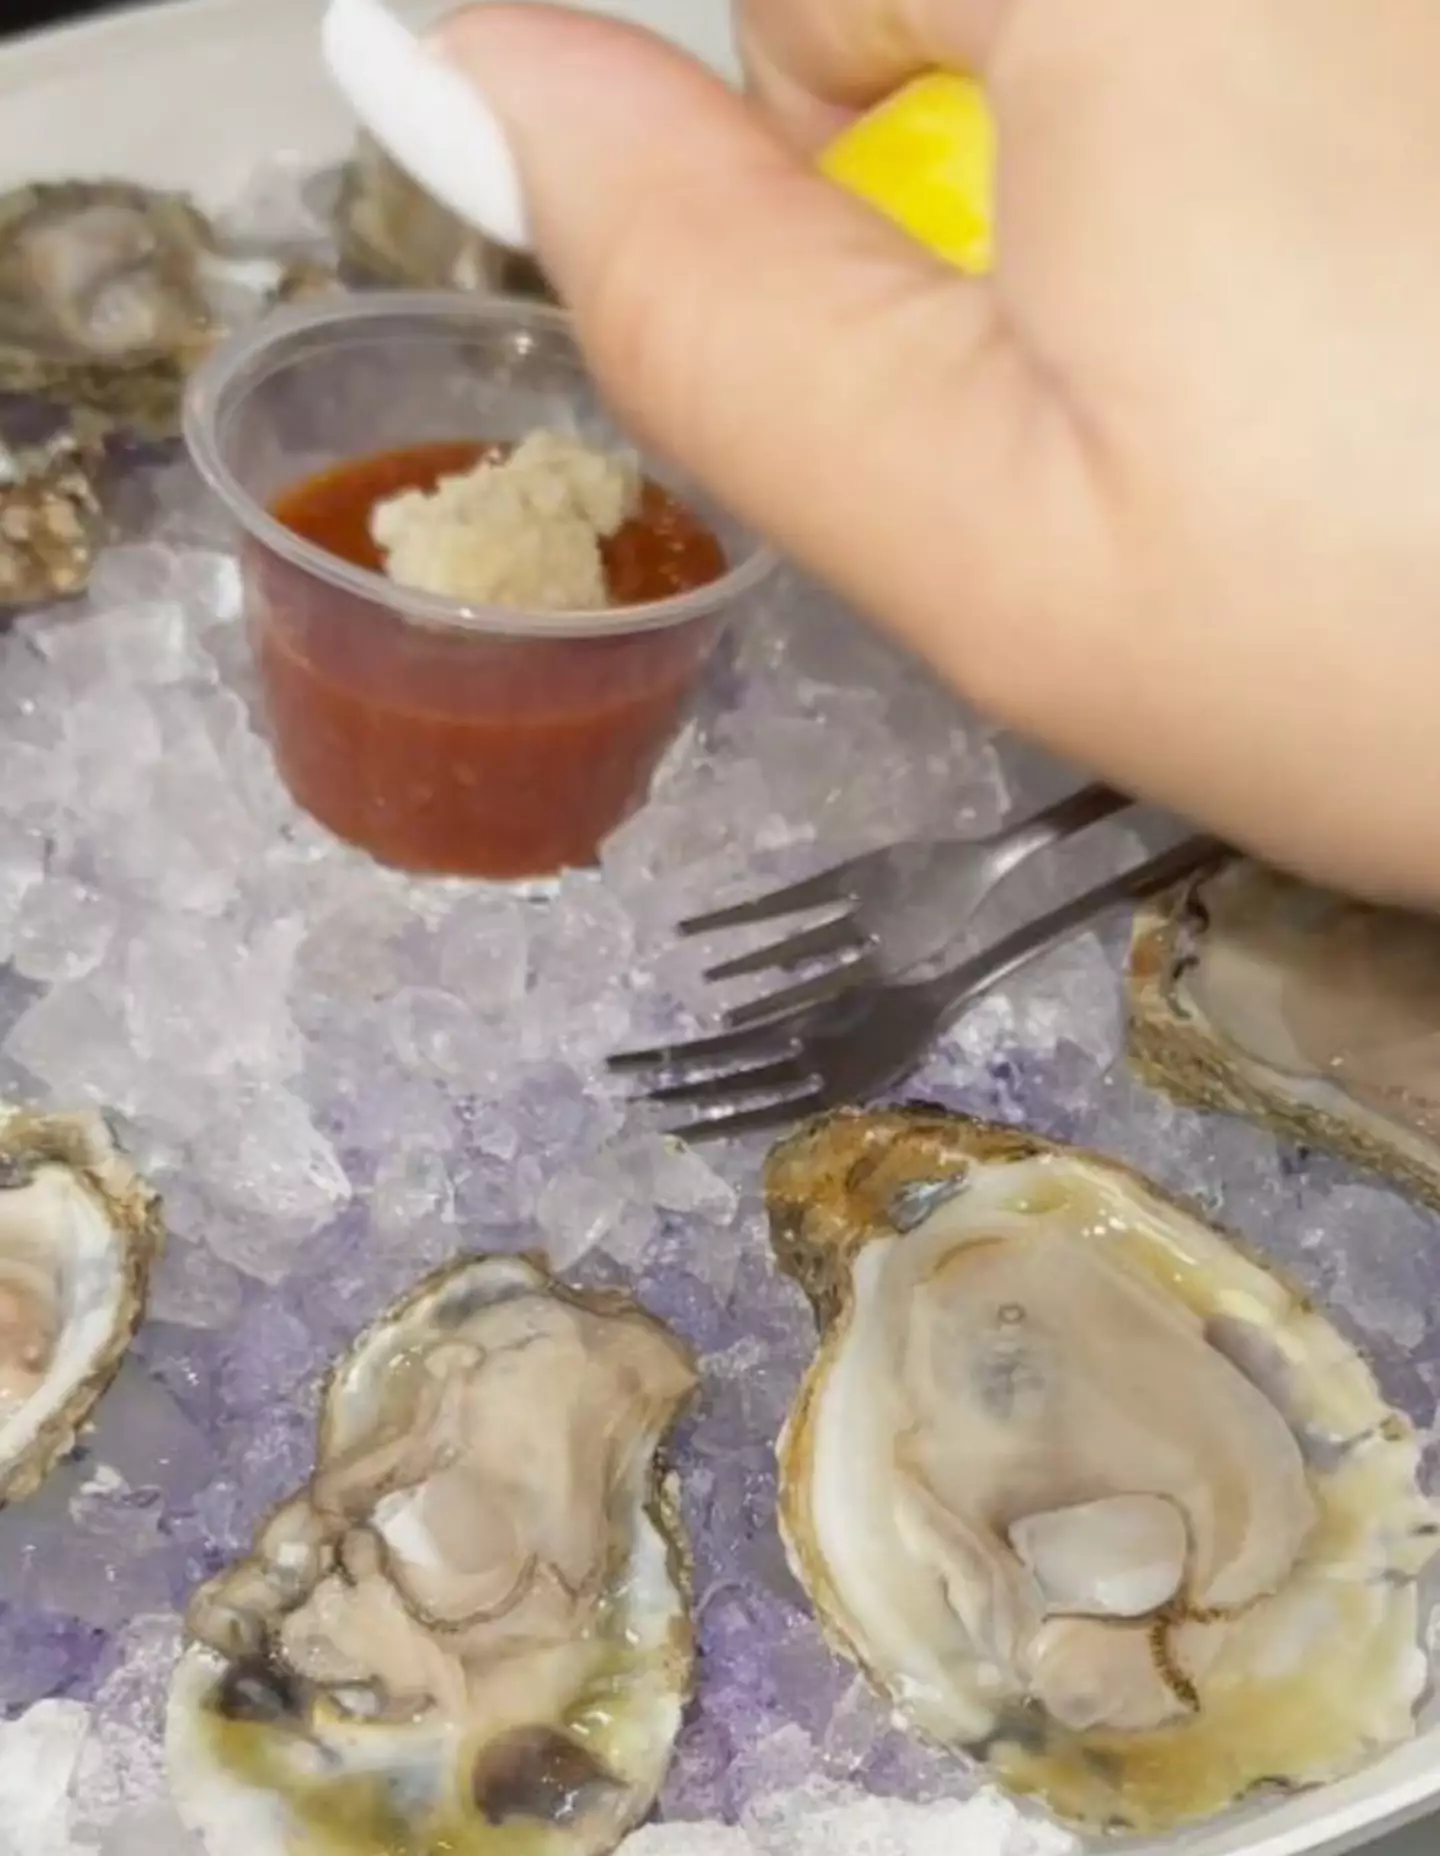 She managed to knock back an impressive 48 oysters in a single sitting.